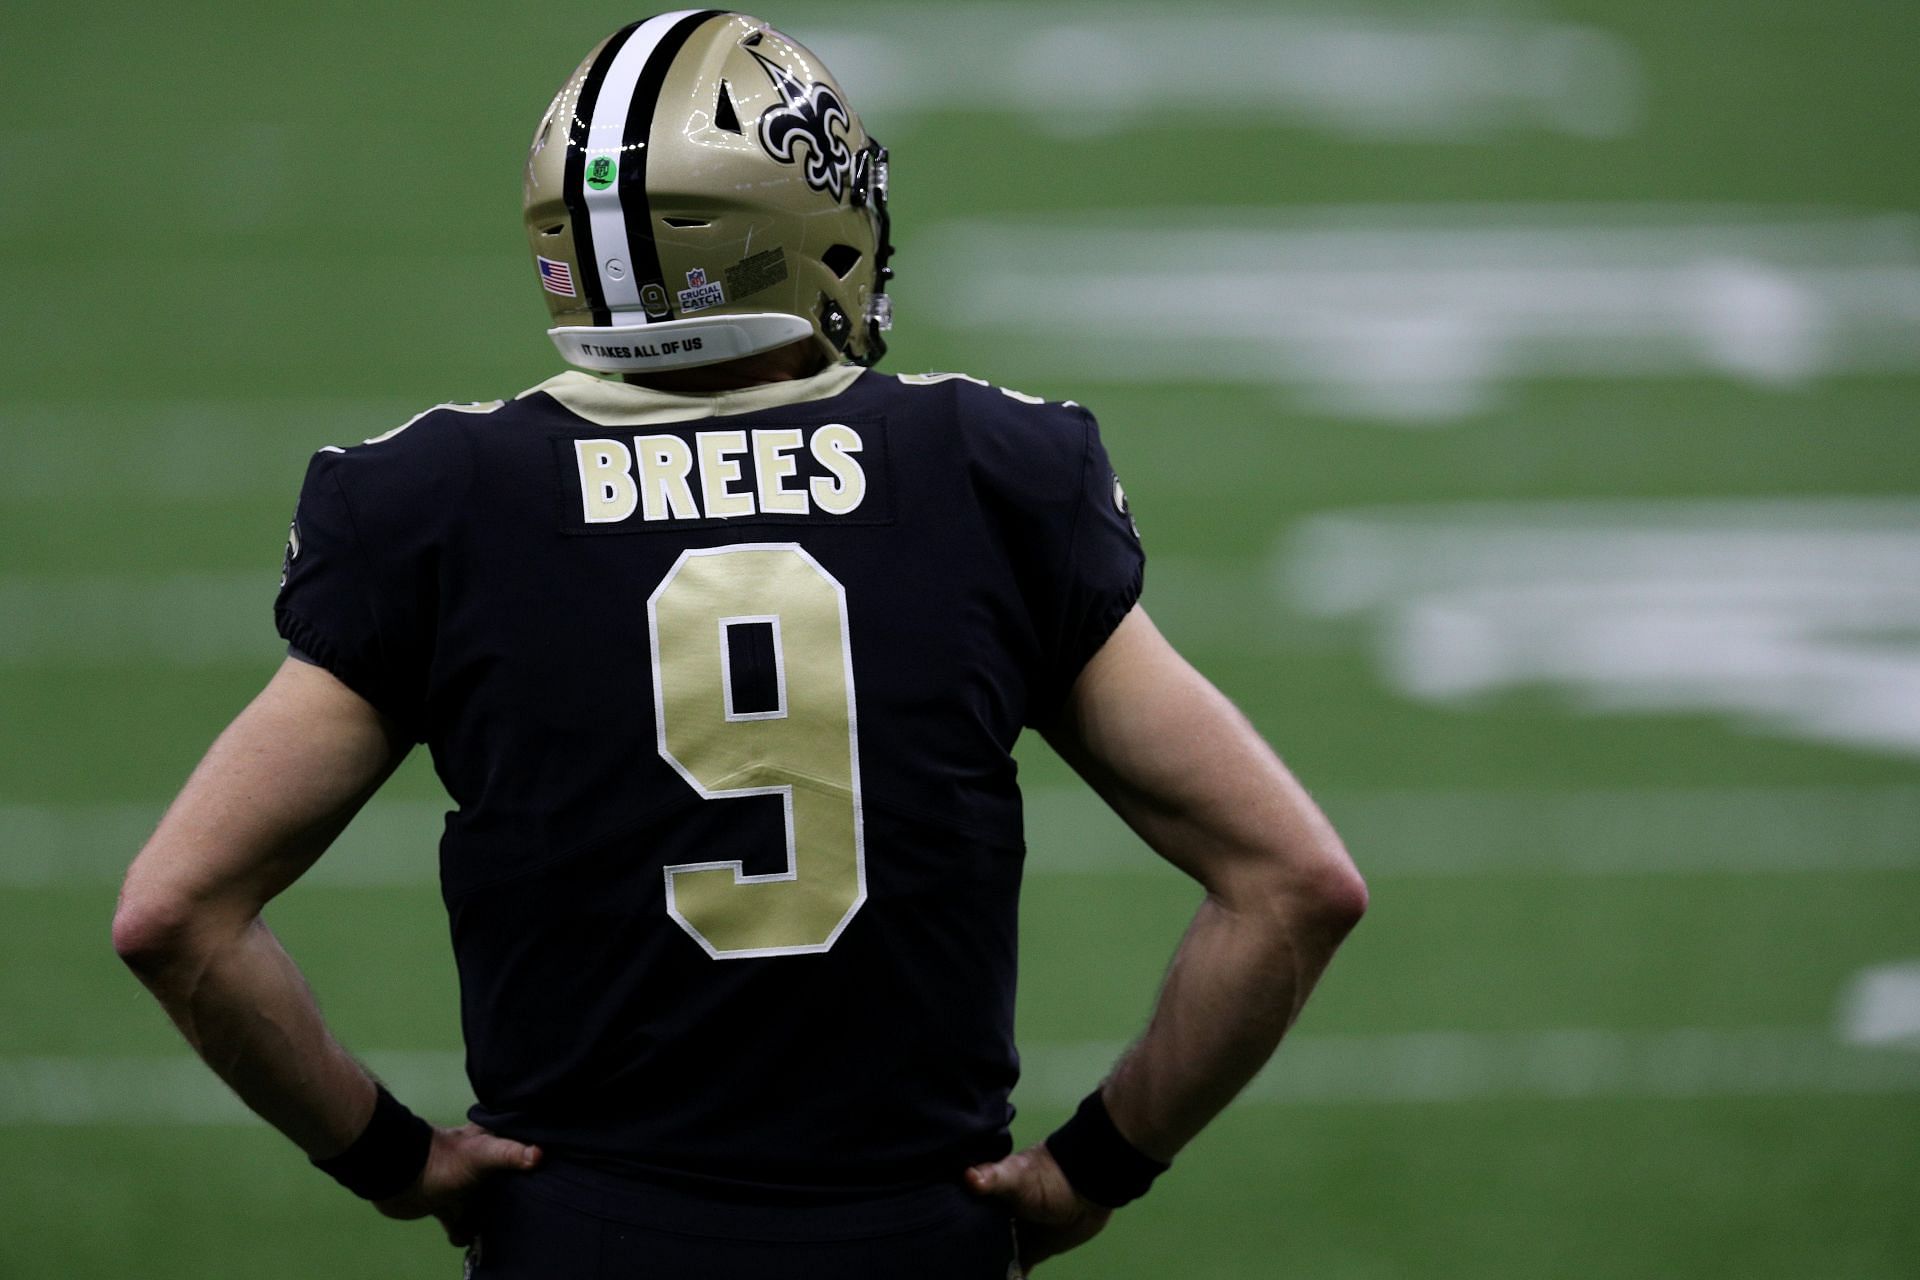 Drew Brees is a future Hall of Famer